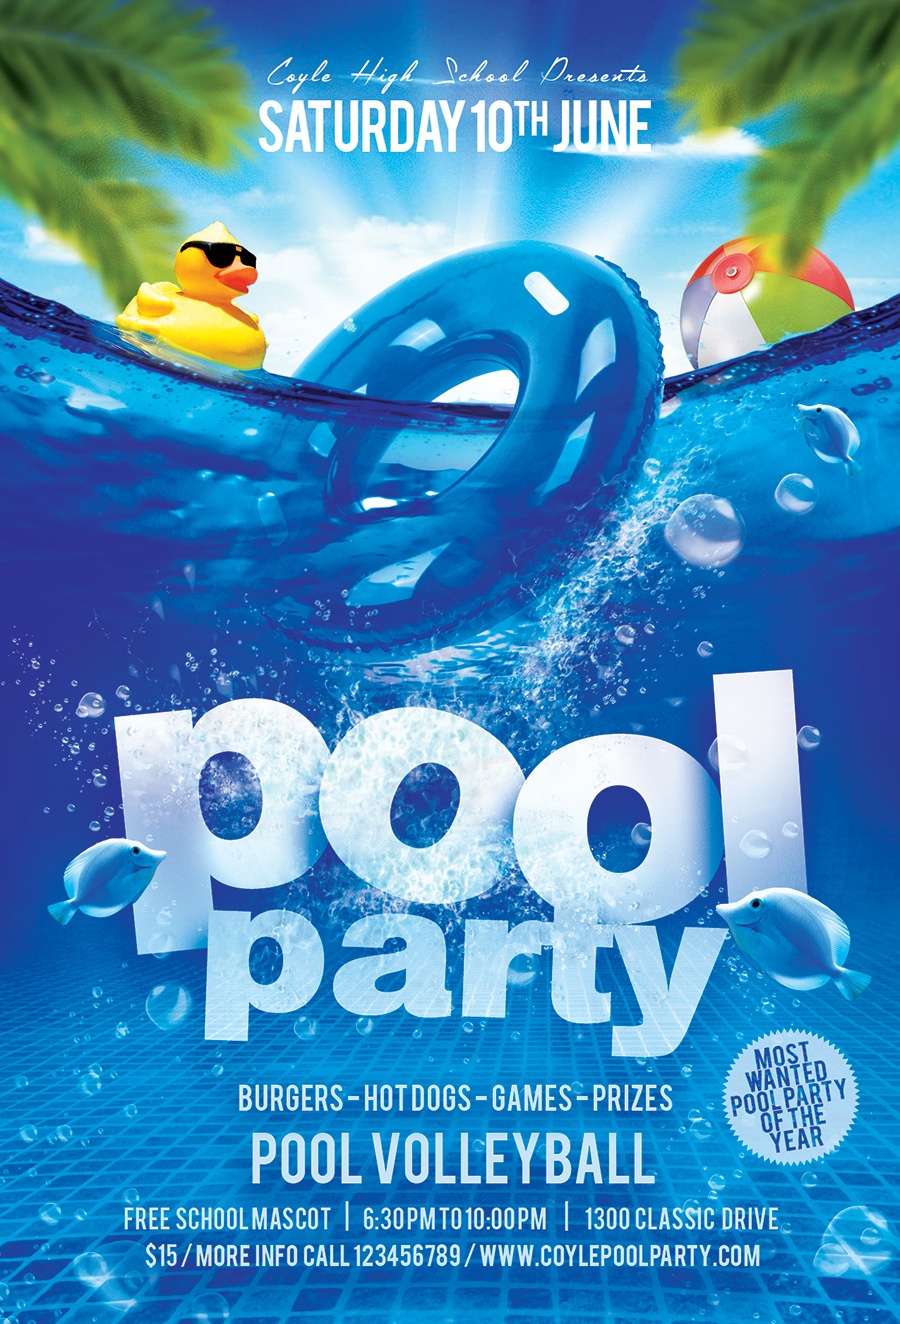 A K-12 Mascots Pool Party - Pool Party Flyers Free Printable